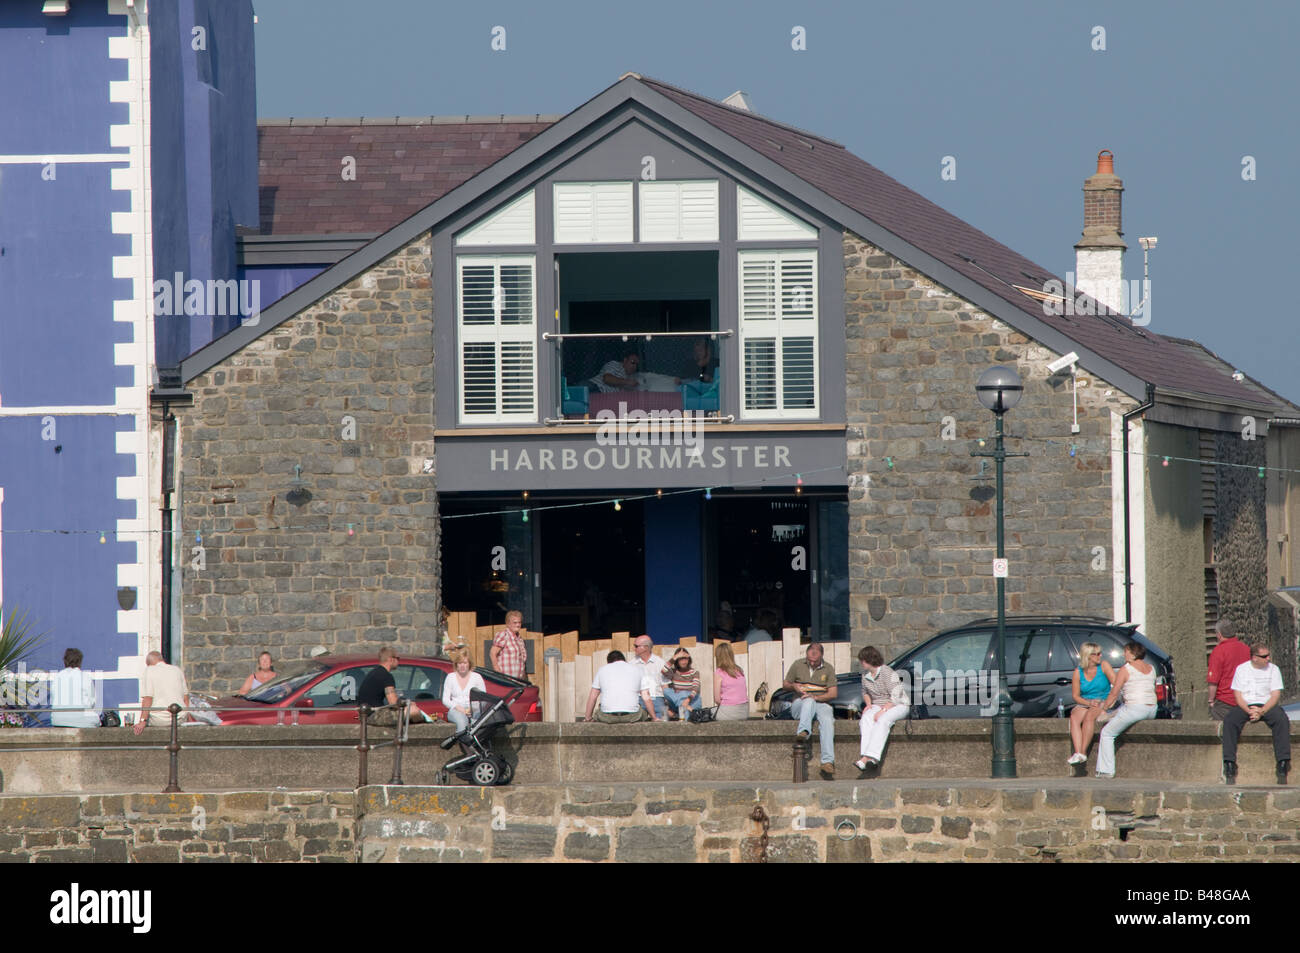 The Harbourmaster 5 star hotel on the quayside in Aberaeron Ceredigion Wales UK Stock Photo